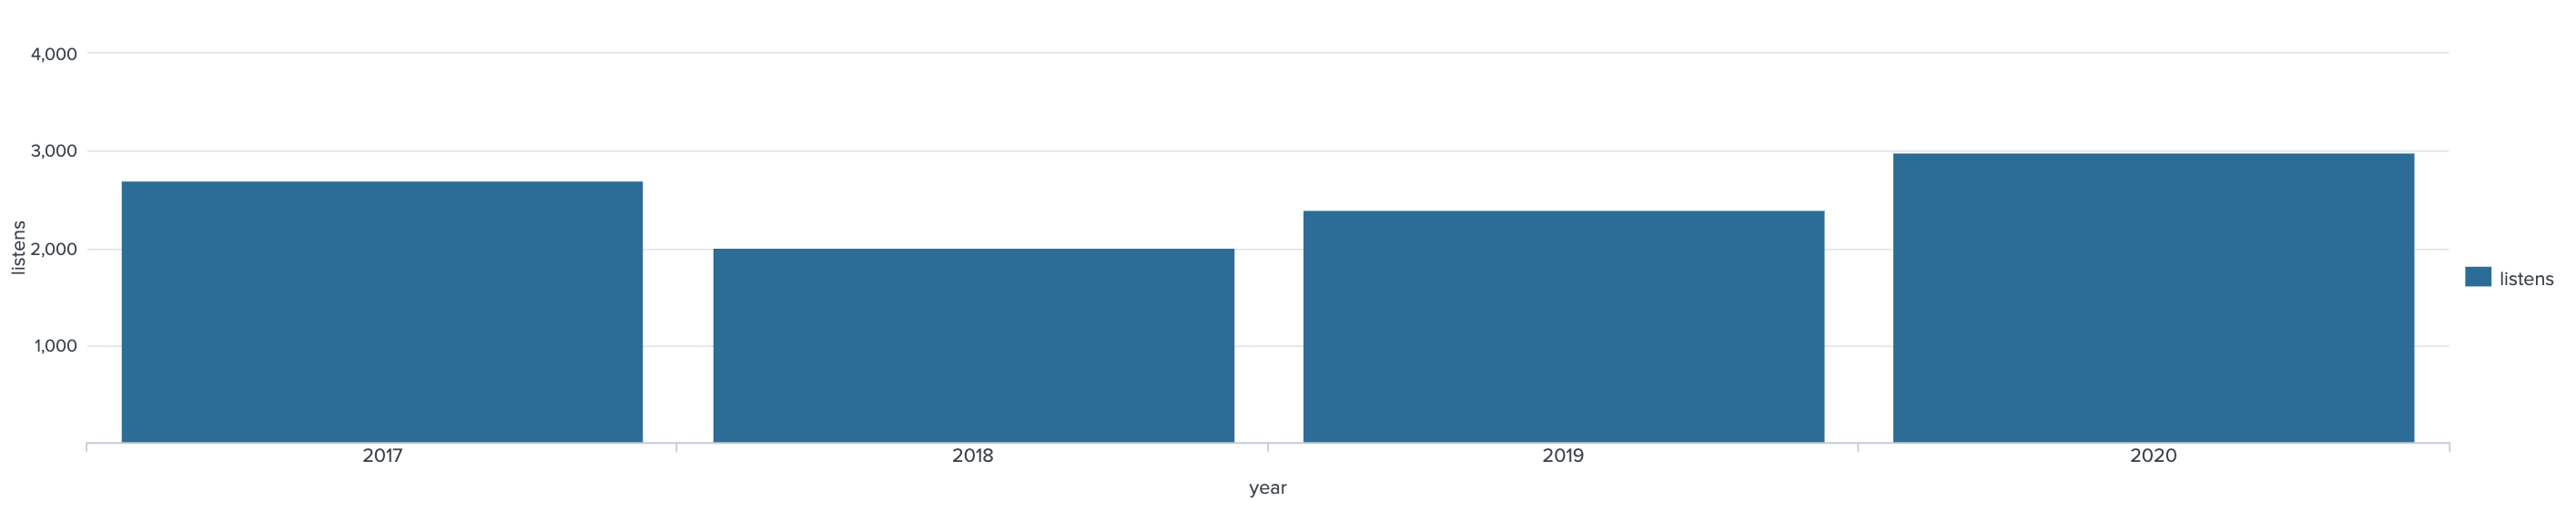 Chart depicting 2700 total listens for 2017, 2000 total listens for 2018, and 2300 total listens for 2019 during March, April, and May, compared to 3000 total listens in that same period in 2020.